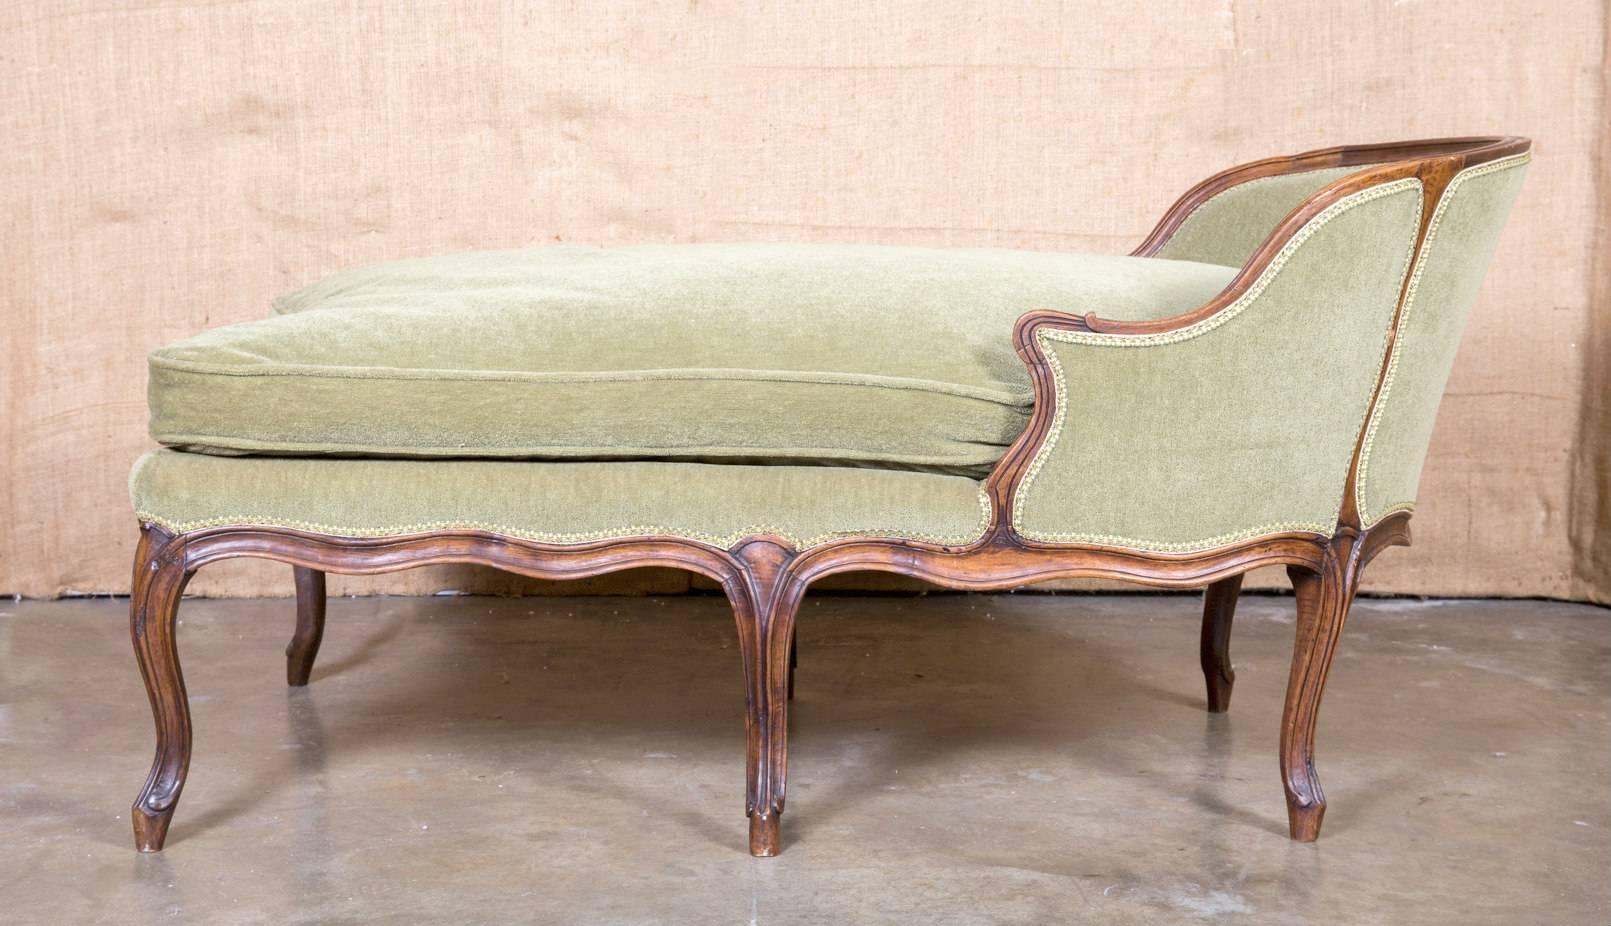 Louis XV style petite chaise longue handcrafted in walnut. The seat cushion is a mixture of dawn and feather and the upholstery is in very good condition. Rests over scrolled French toes.